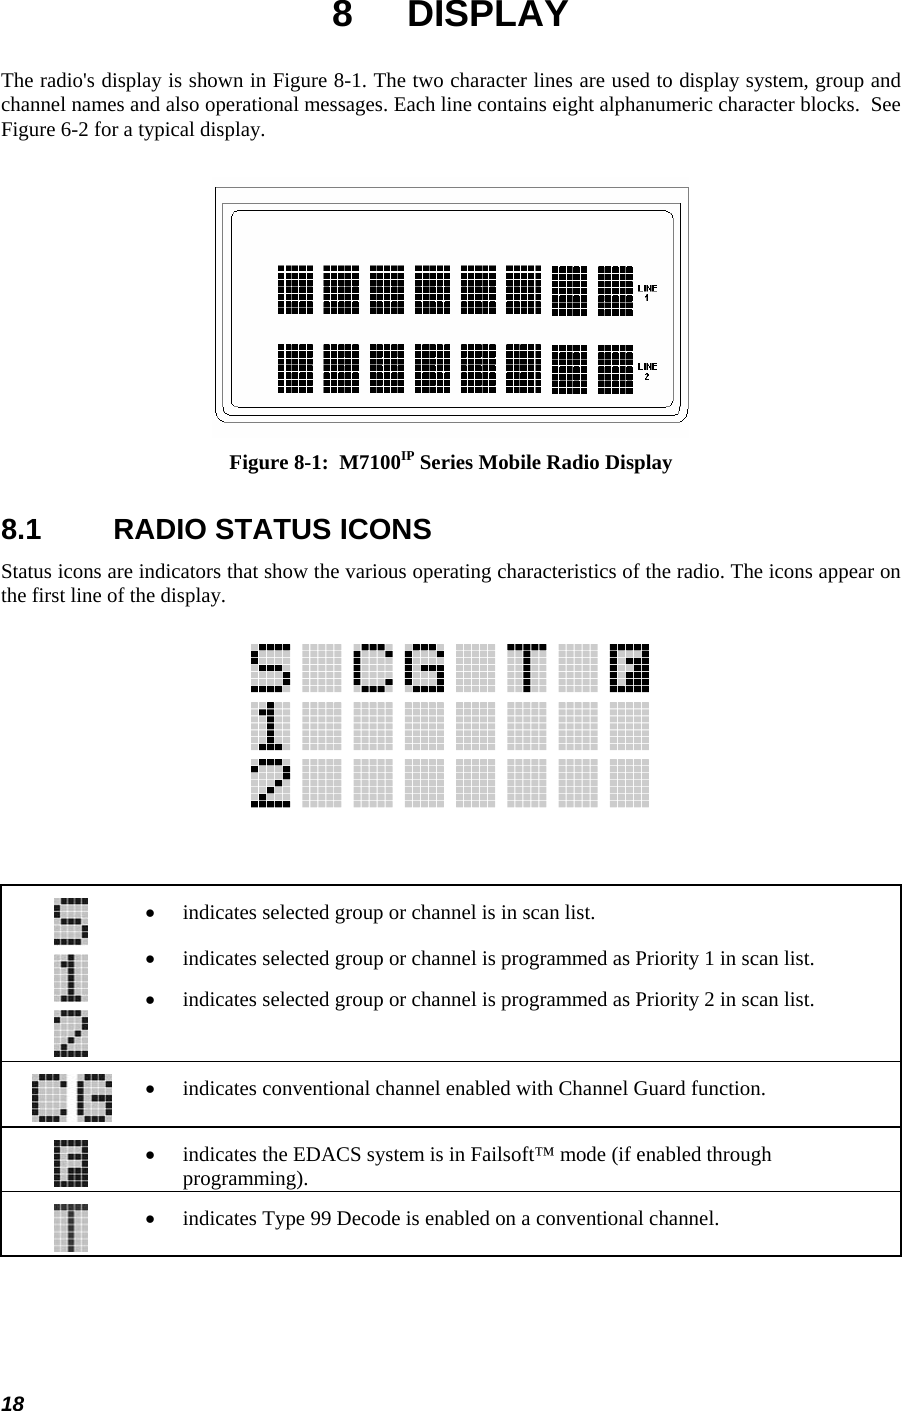  18 8 DISPLAY The radio&apos;s display is shown in Figure 8-1. The two character lines are used to display system, group and channel names and also operational messages. Each line contains eight alphanumeric character blocks.  See Figure 6-2 for a typical display.   Figure 8-1:  M7100IP Series Mobile Radio Display 8.1  RADIO STATUS ICONS Status icons are indicators that show the various operating characteristics of the radio. The icons appear on the first line of the display.     • indicates selected group or channel is in scan list. • indicates selected group or channel is programmed as Priority 1 in scan list. • indicates selected group or channel is programmed as Priority 2 in scan list.   • indicates conventional channel enabled with Channel Guard function.   • indicates the EDACS system is in Failsoft™ mode (if enabled through programming).   • indicates Type 99 Decode is enabled on a conventional channel.  